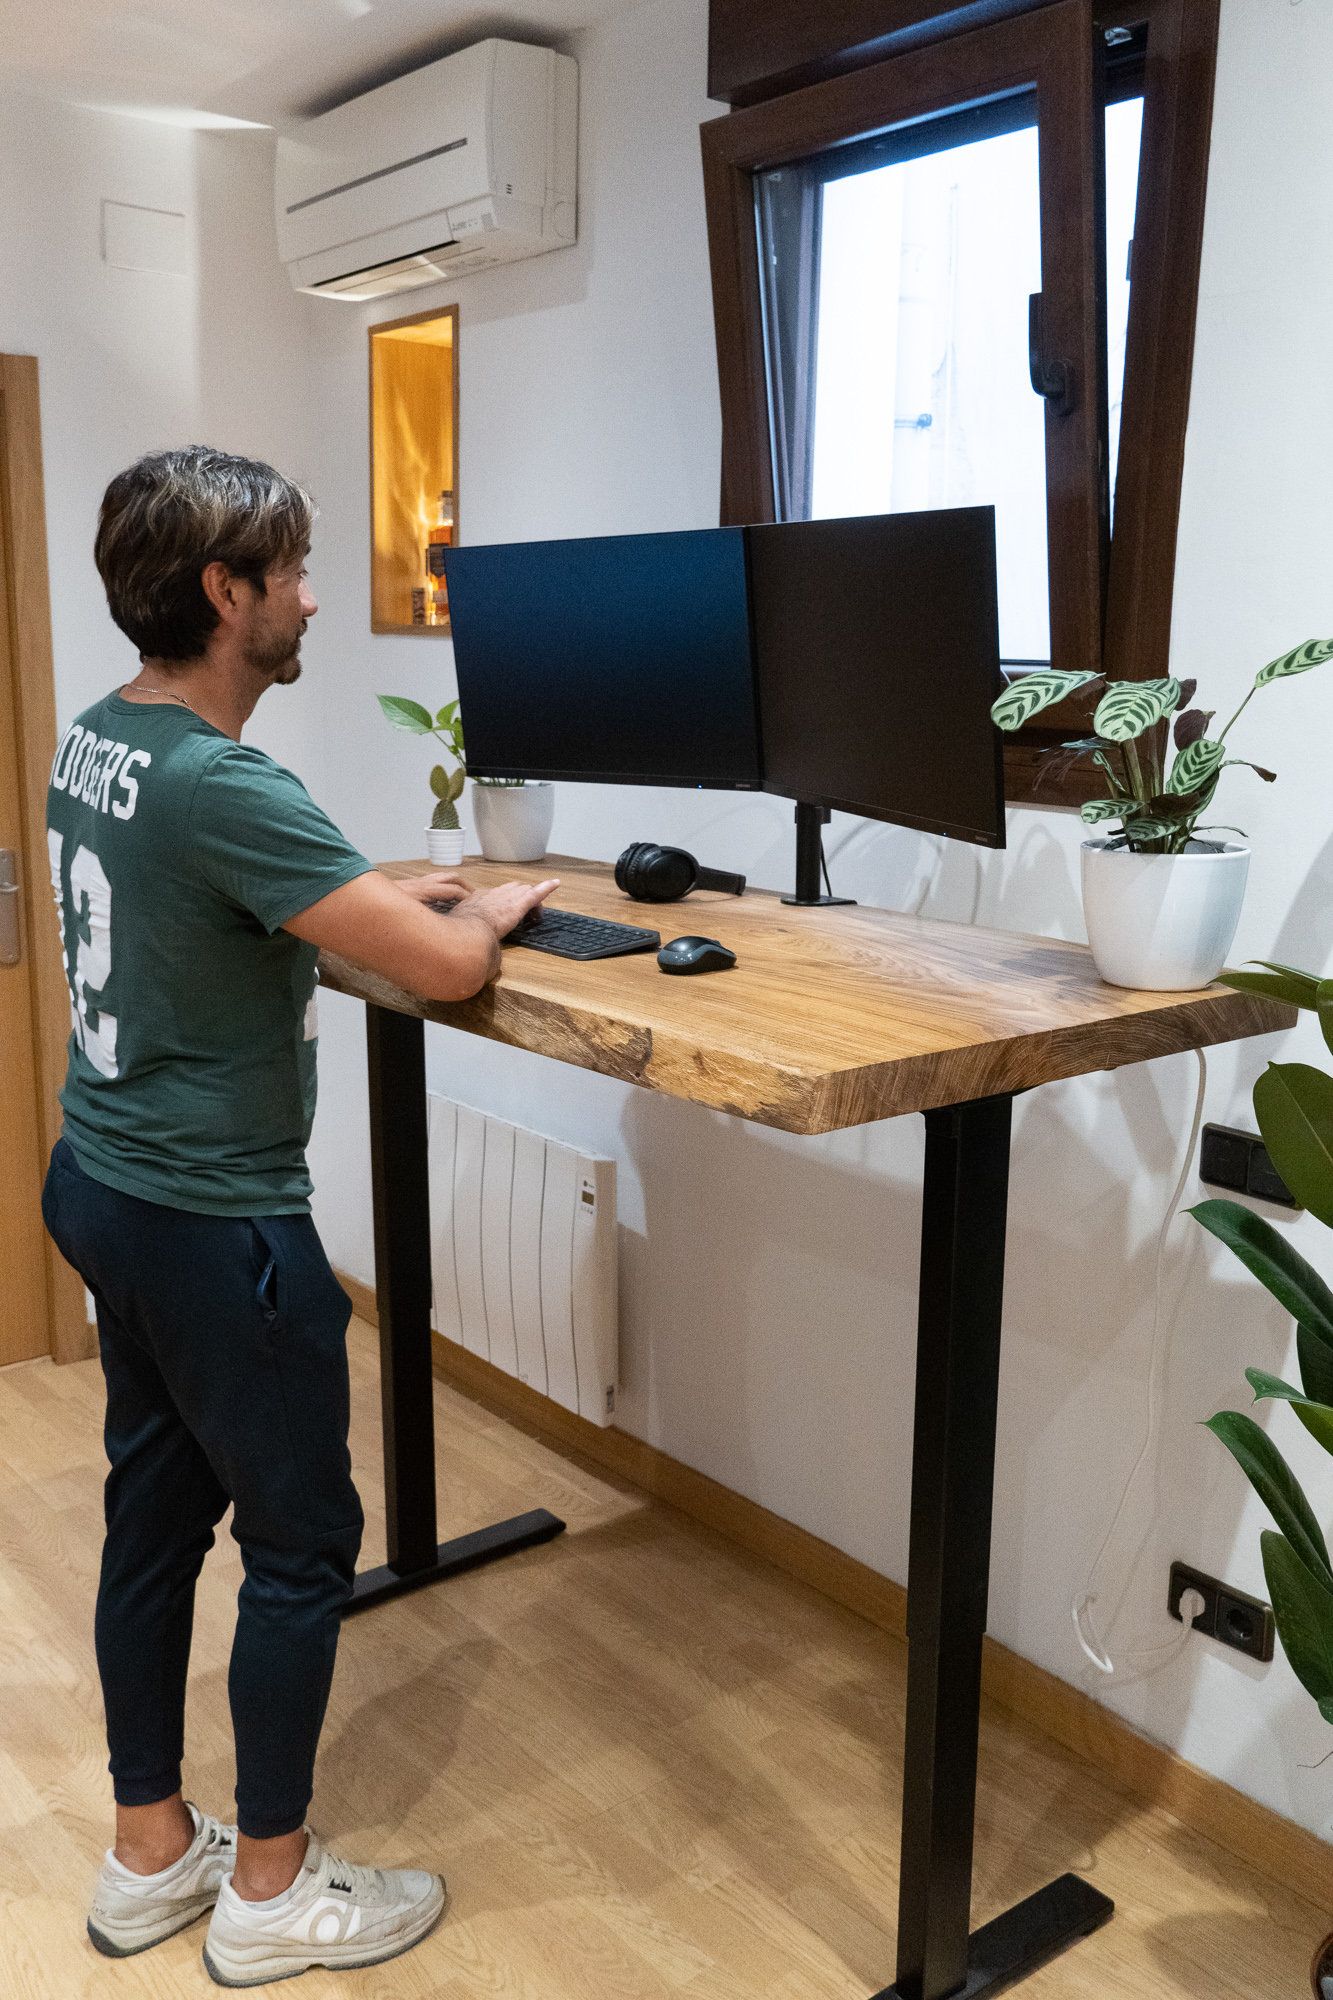 How a Sit Stand Desk Can Improve Your
Health